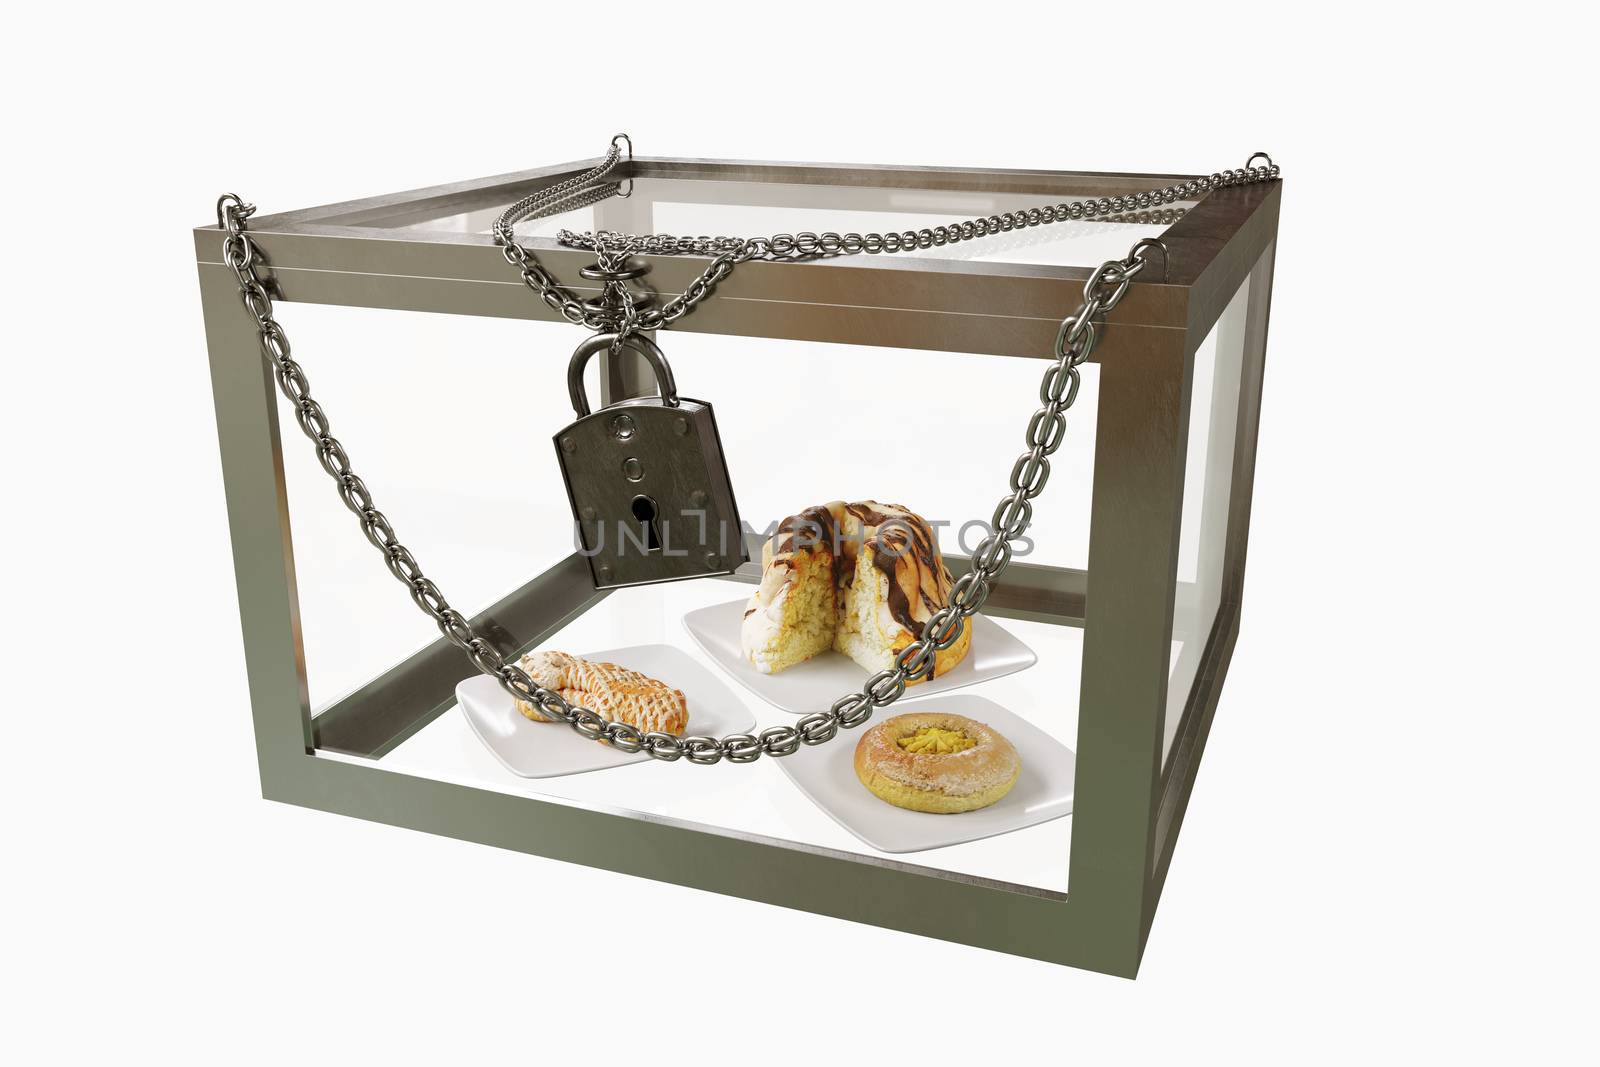 cakes in close metal box with chains diet concept composition photo